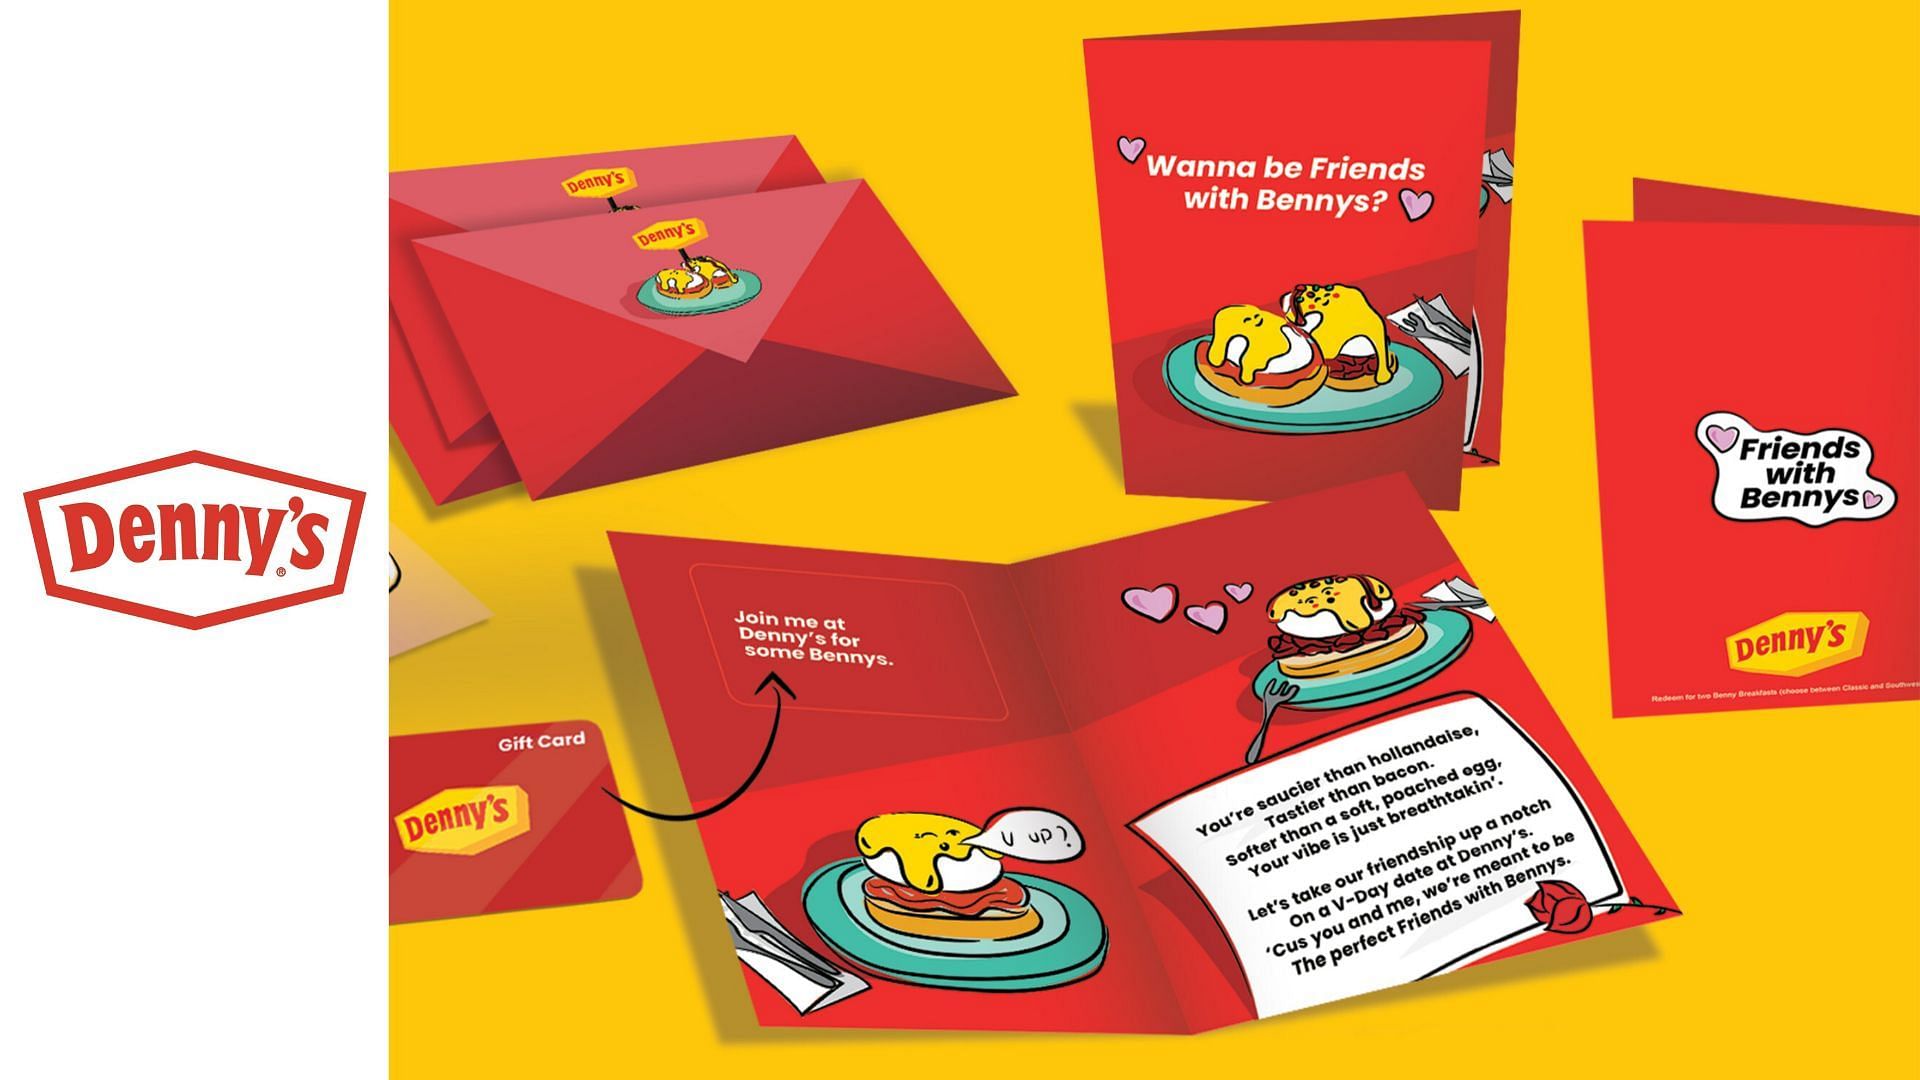 Denny&rsquo;s introduces limited edition Friends with Benny&rsquo;s gift cards (Image via Denny